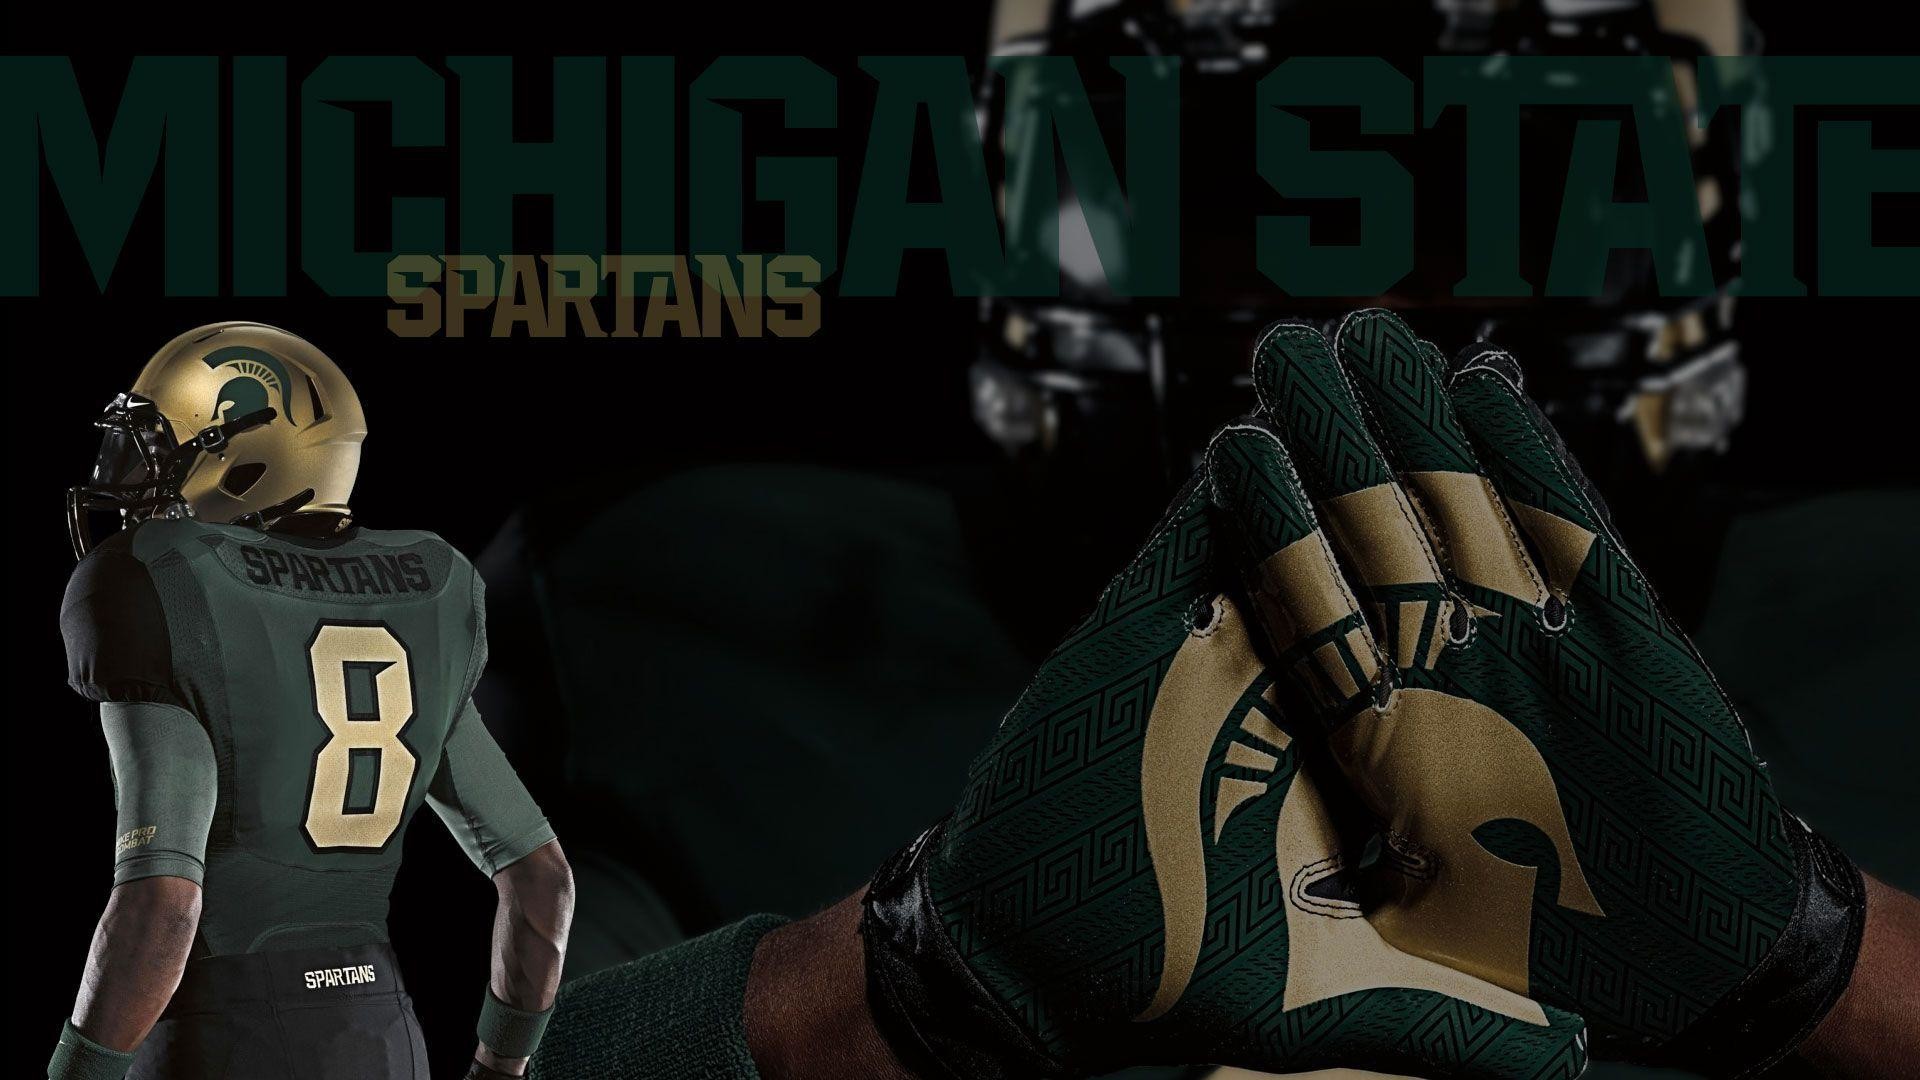 1920x1080 Michigan State Spartans Wallpaper Images & Pictures - Becuo